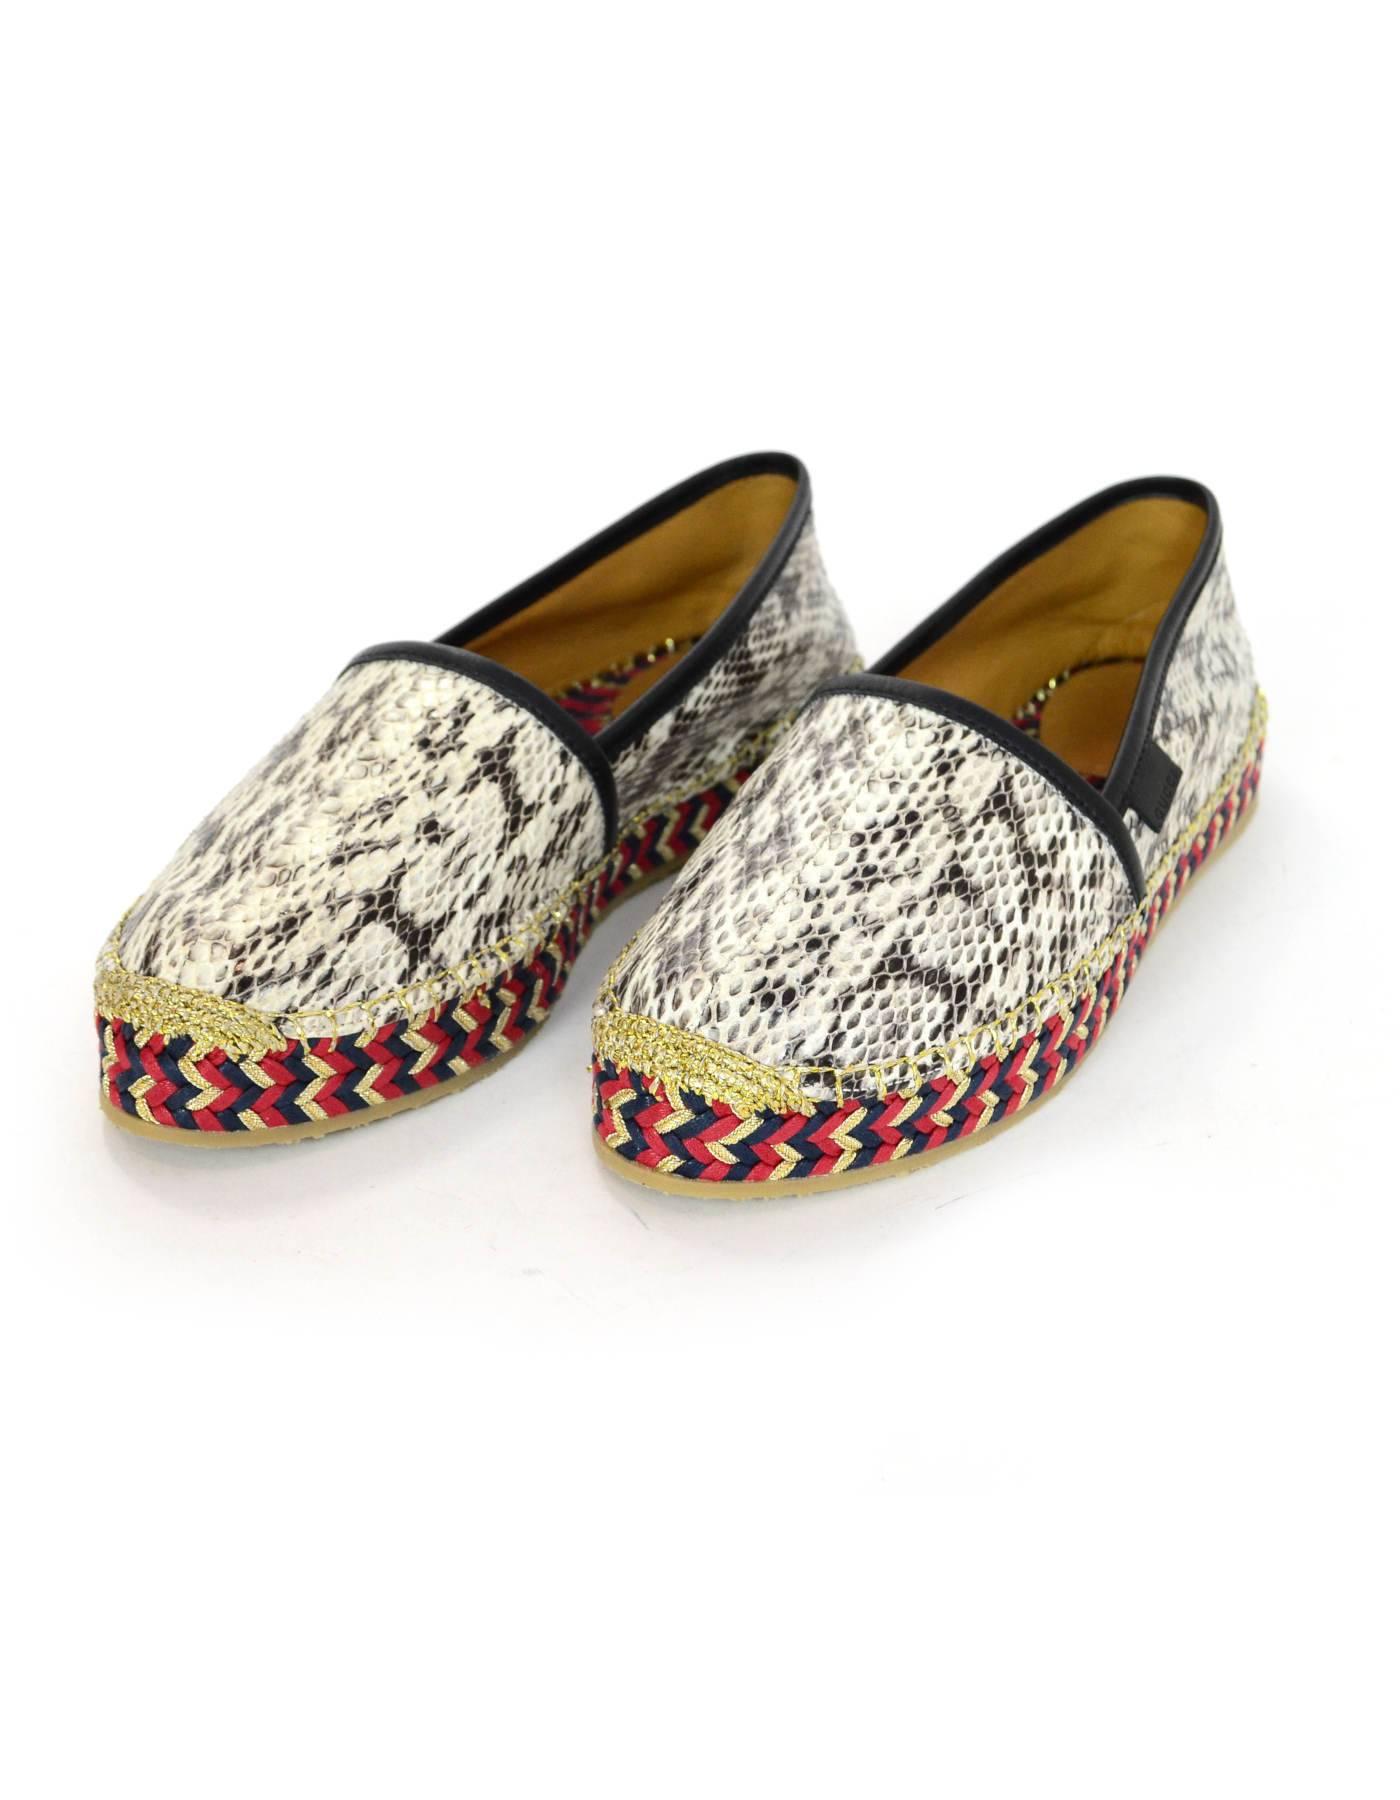 Gucci Snakeskin Pilar Espadrilles Sz 36.5 NIB

Features red, navy & gold braided platform

Made In: Spain
Color: Black, white, red, gold
Materials: Snakeskin, leather
Closure/Opening: Slide on
Sole Stamp: Gucci Made in Spain
Overall Condition: